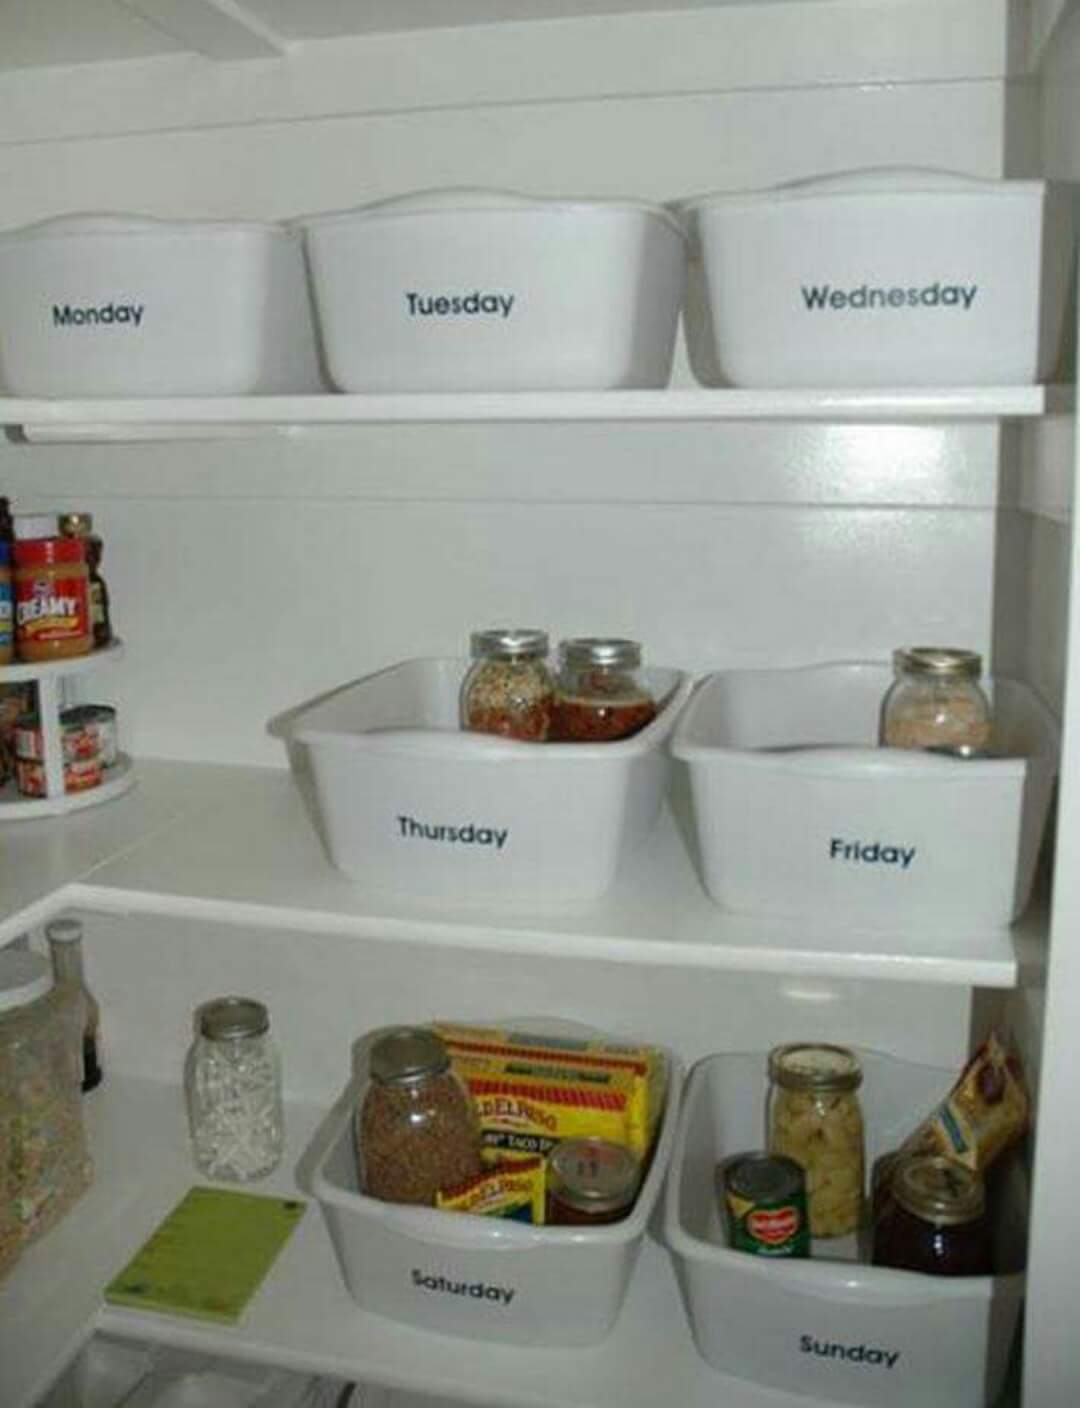 Weekly Meal Organizing Idea | Do It Daily1080 x 1408